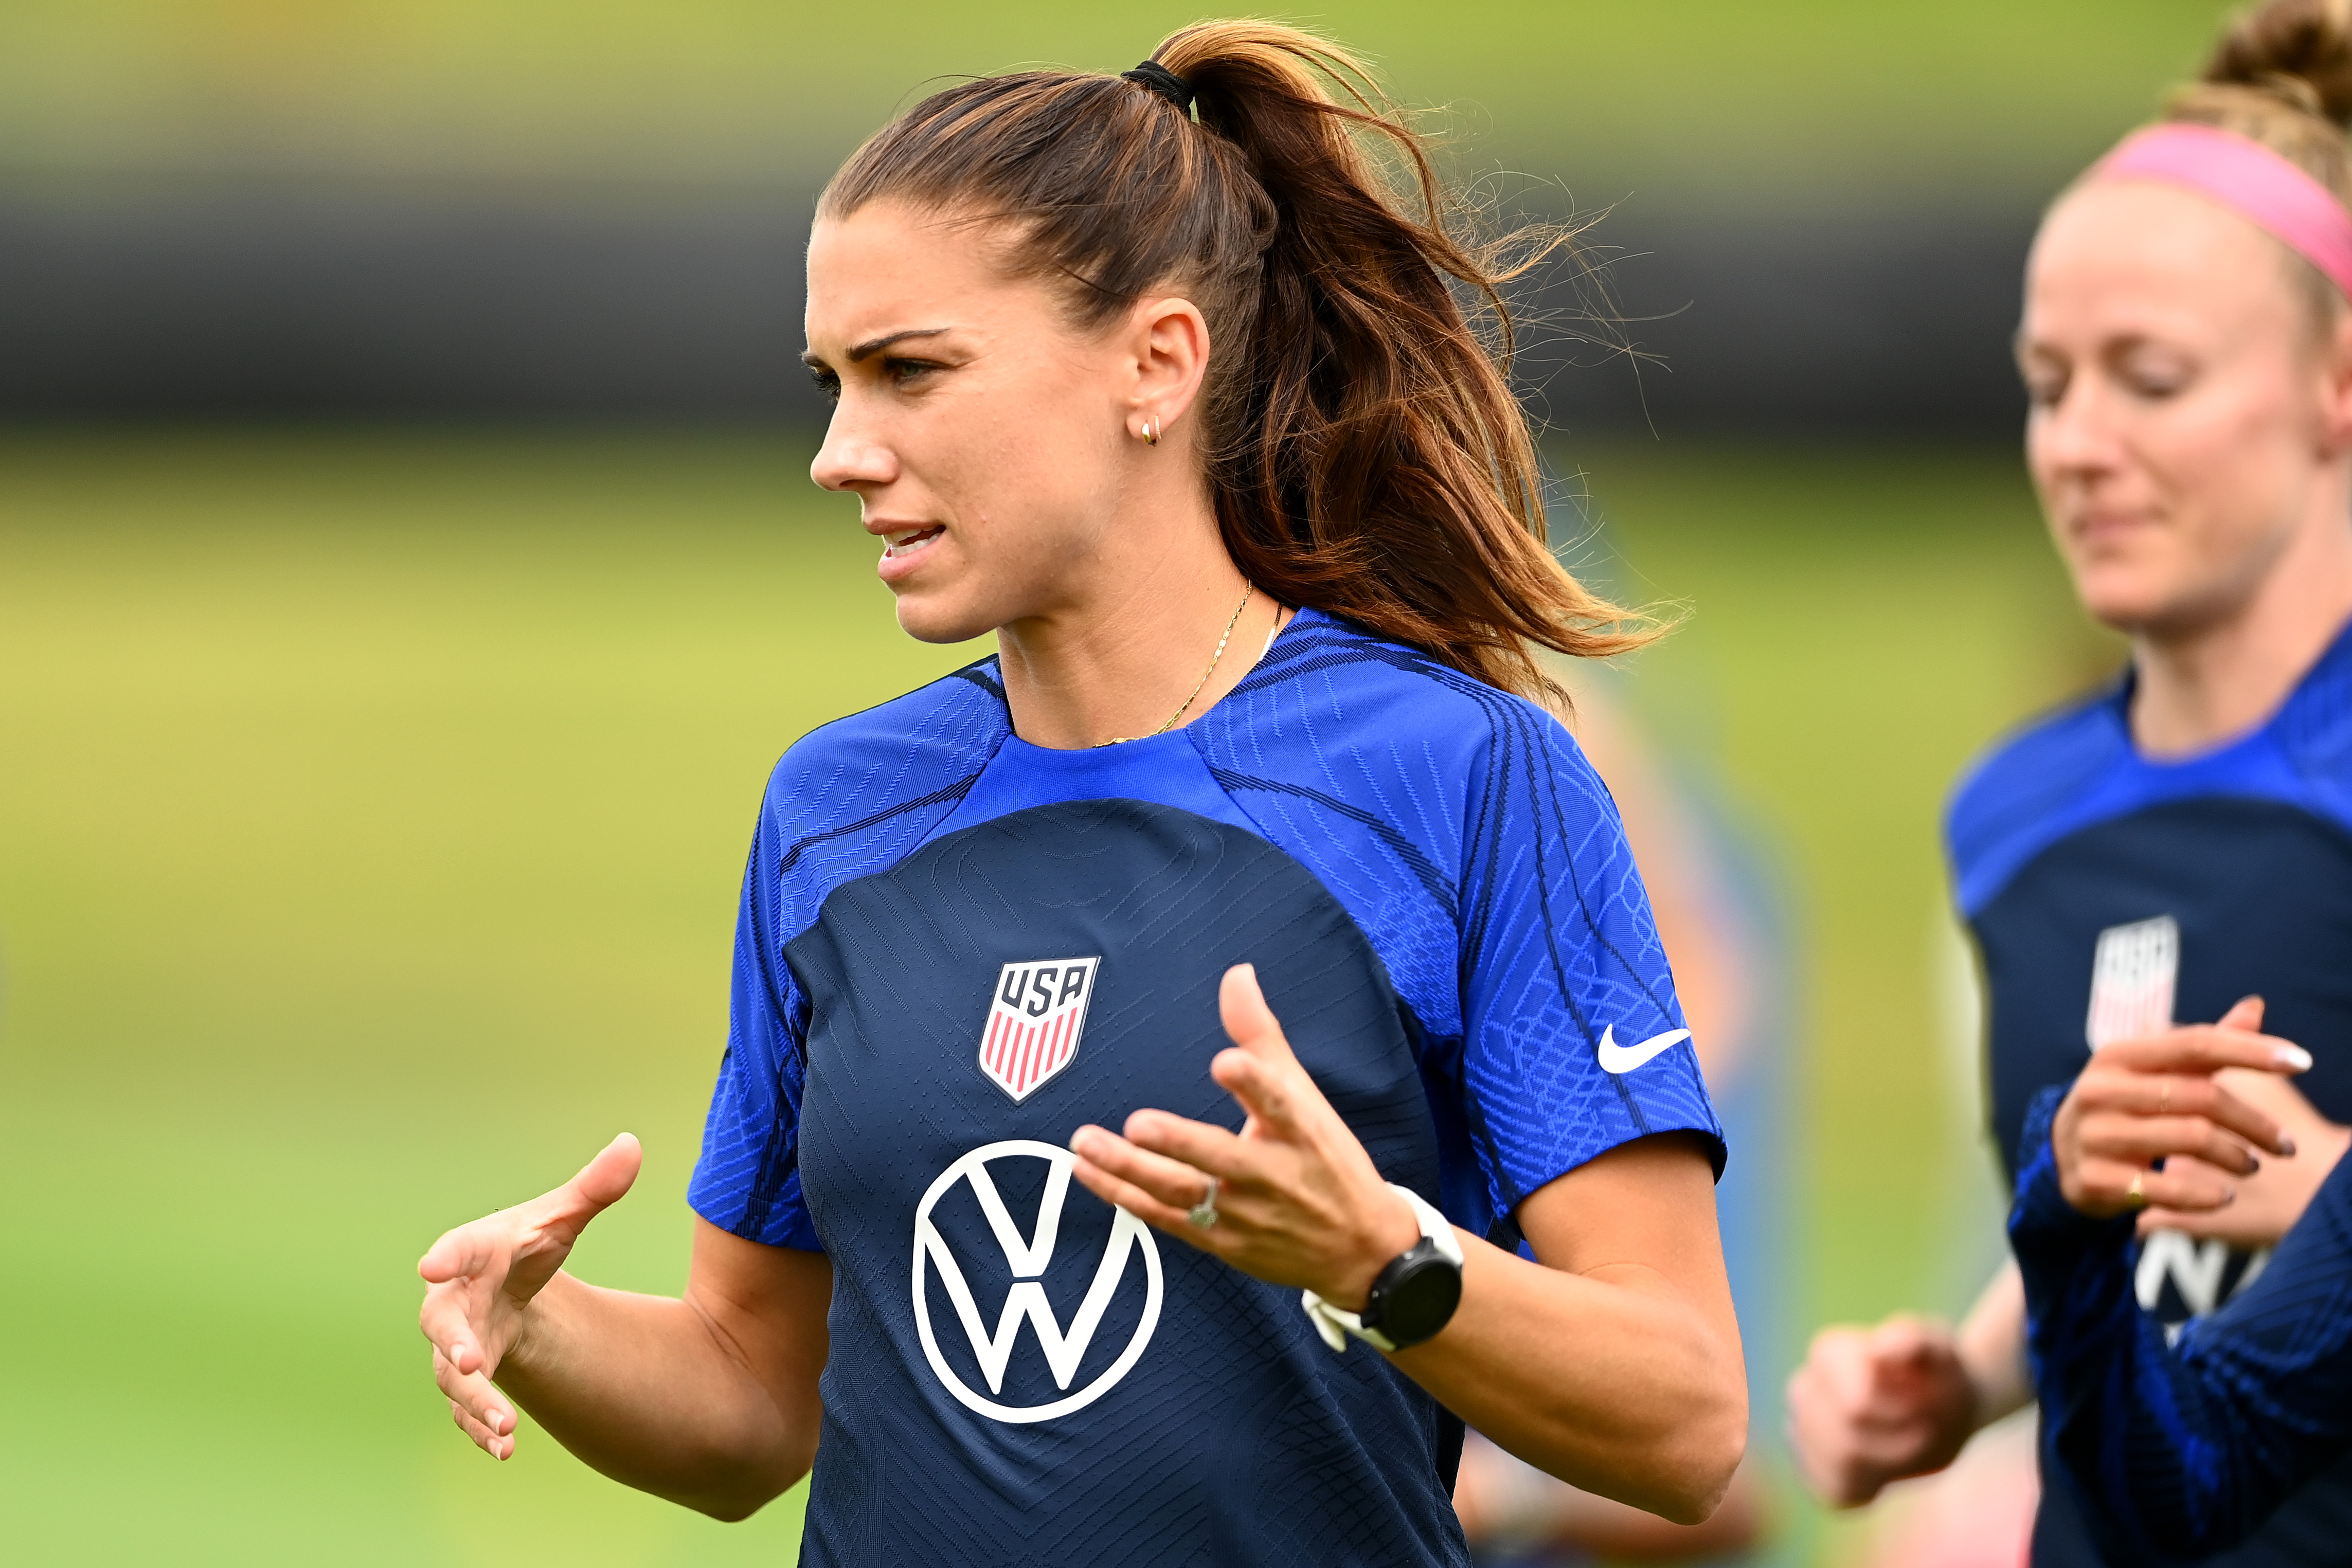 Alex Morgan runs through training drills during a USA National Womens Team player training camp at North Harbour Stadium on January 13, 2023 in Auckland, New Zealand.